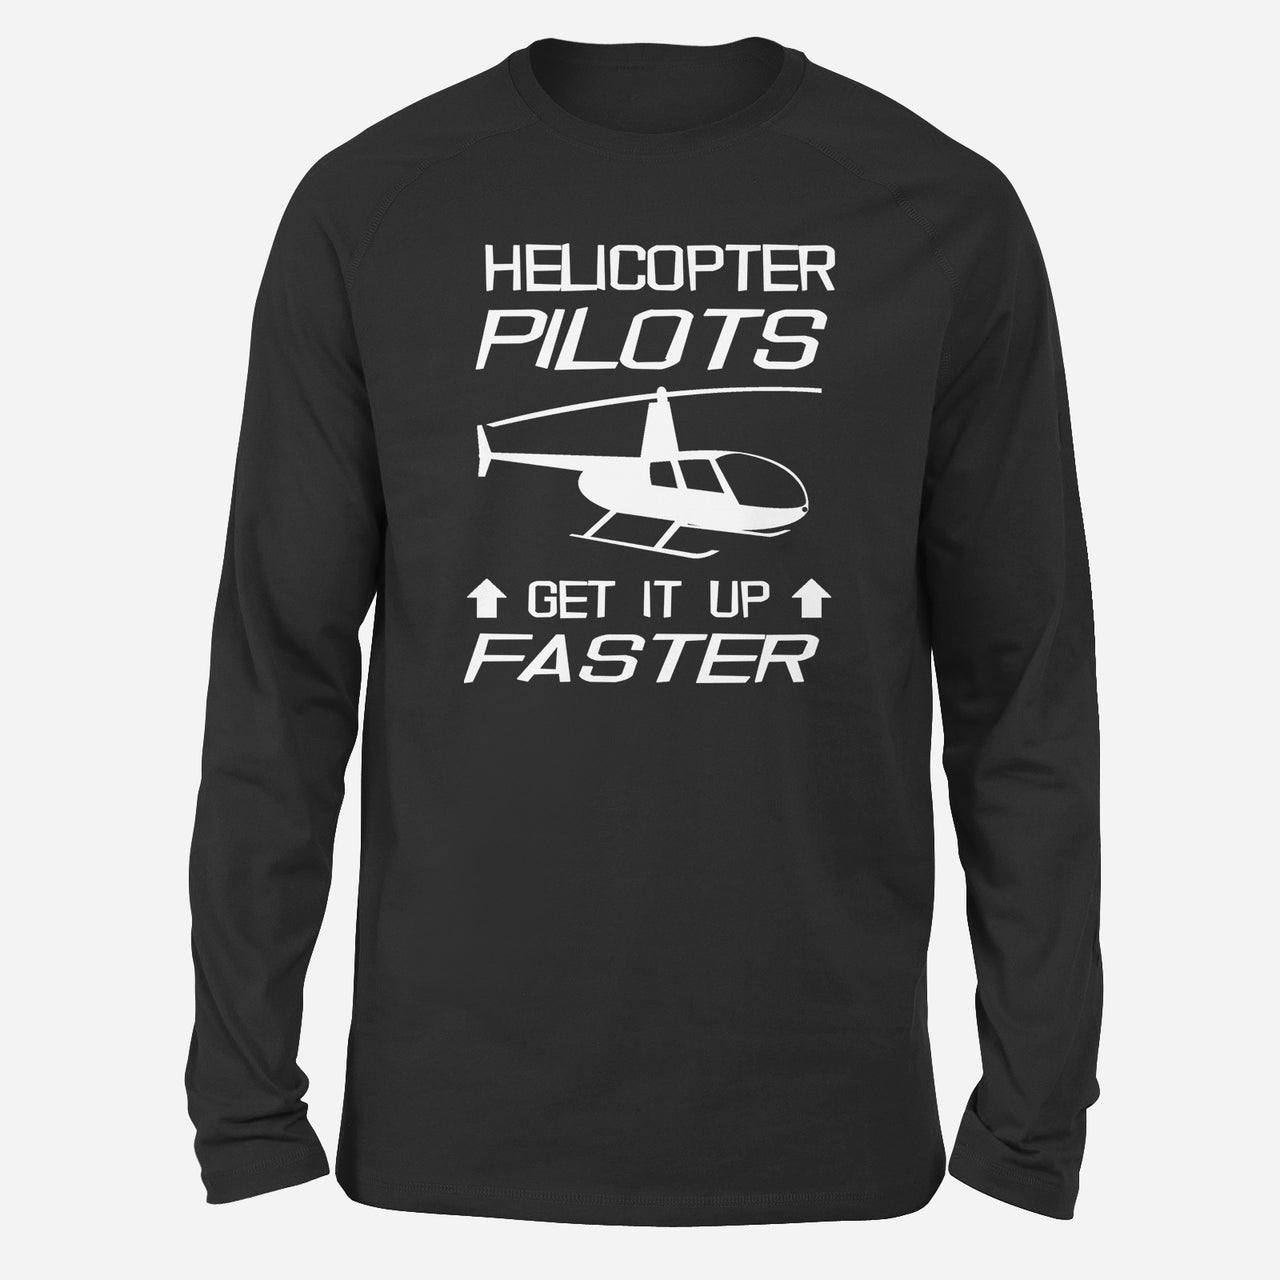 Helicopter Pilots Get It Up Faster Designed Long-Sleeve T-Shirts